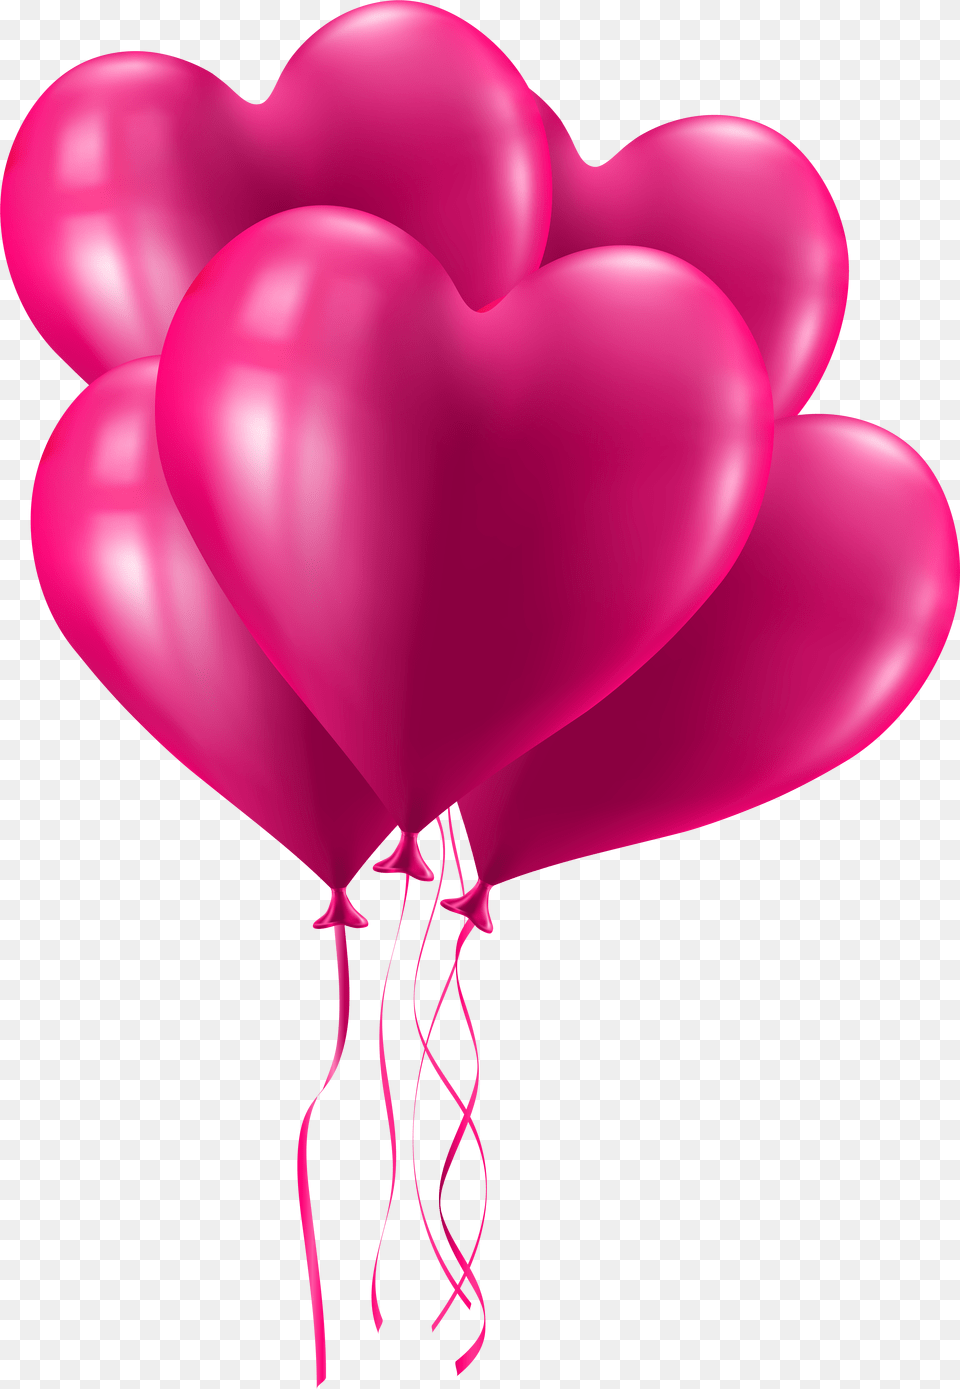 Valentine S Day Pink Heart Balloons Clip Art Imageu200b Transparent Pink Balloons Free Png